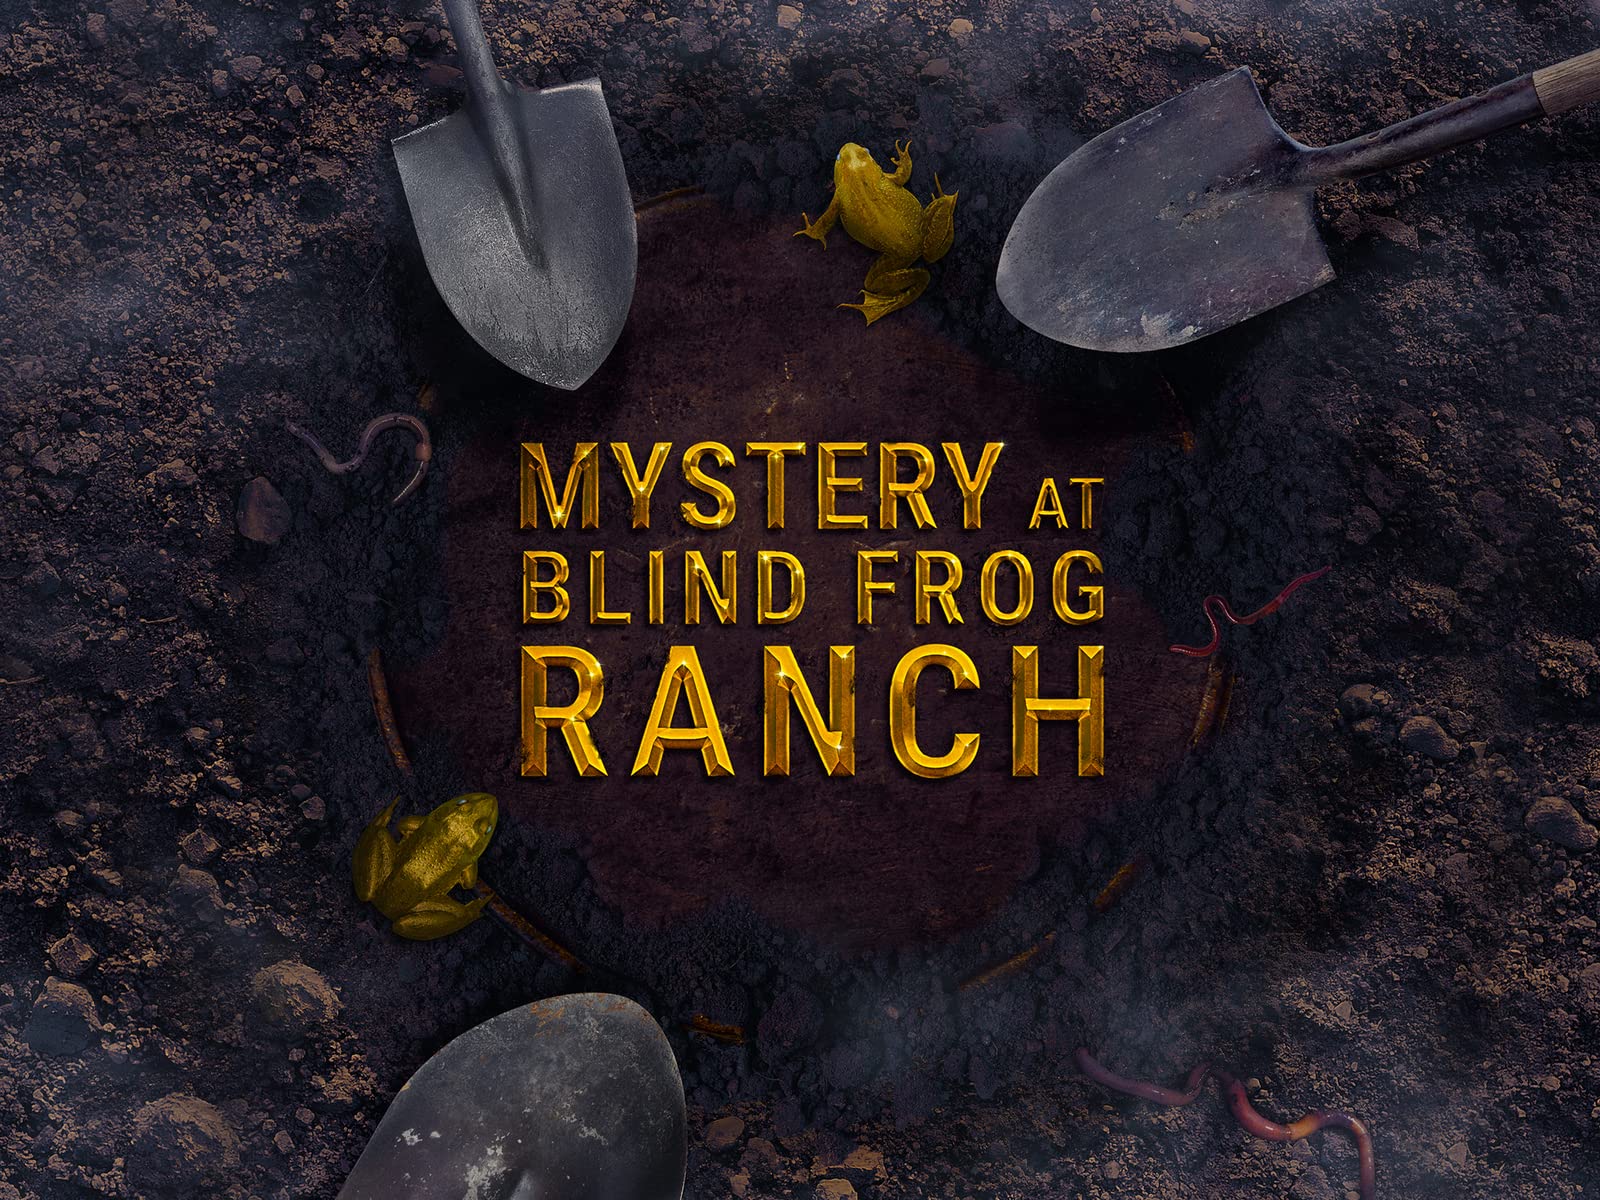 The Blind Frog Ranch Treasure Found After 18 Years!